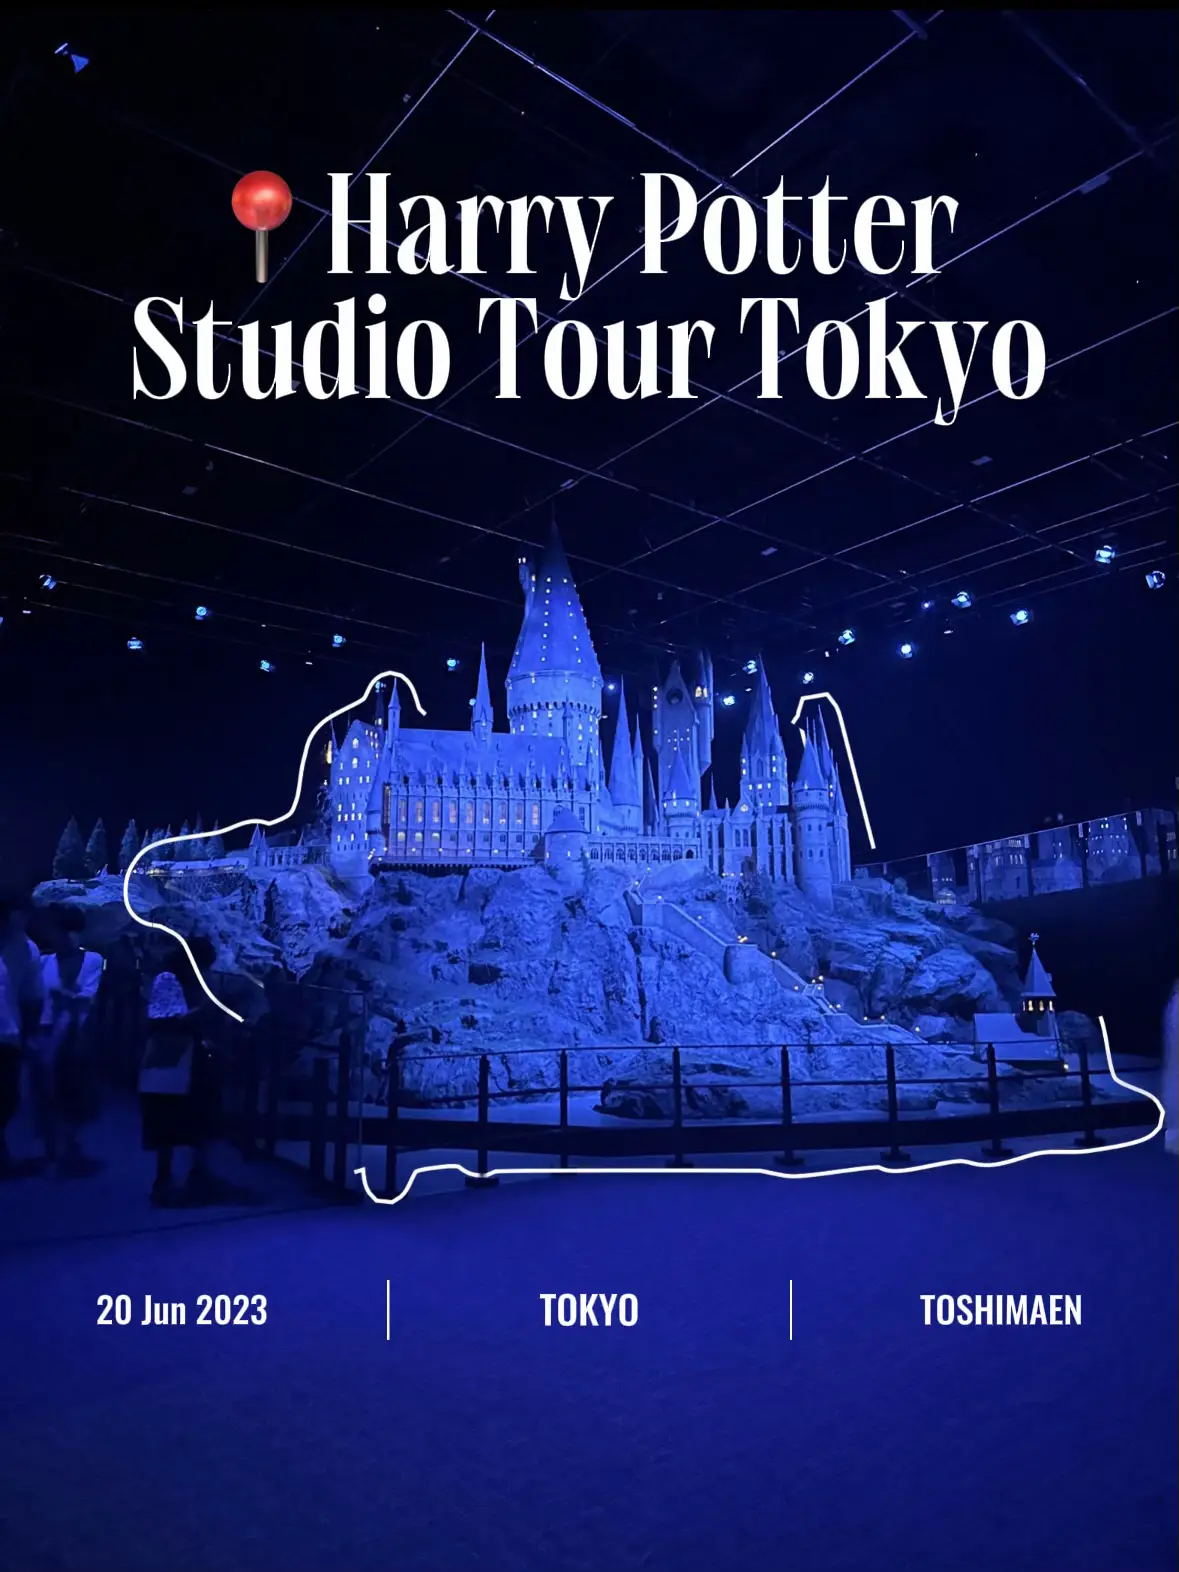 Harry Potter Comes to Life in Tokyo: Exploring the Solamachi Pop-Up Store